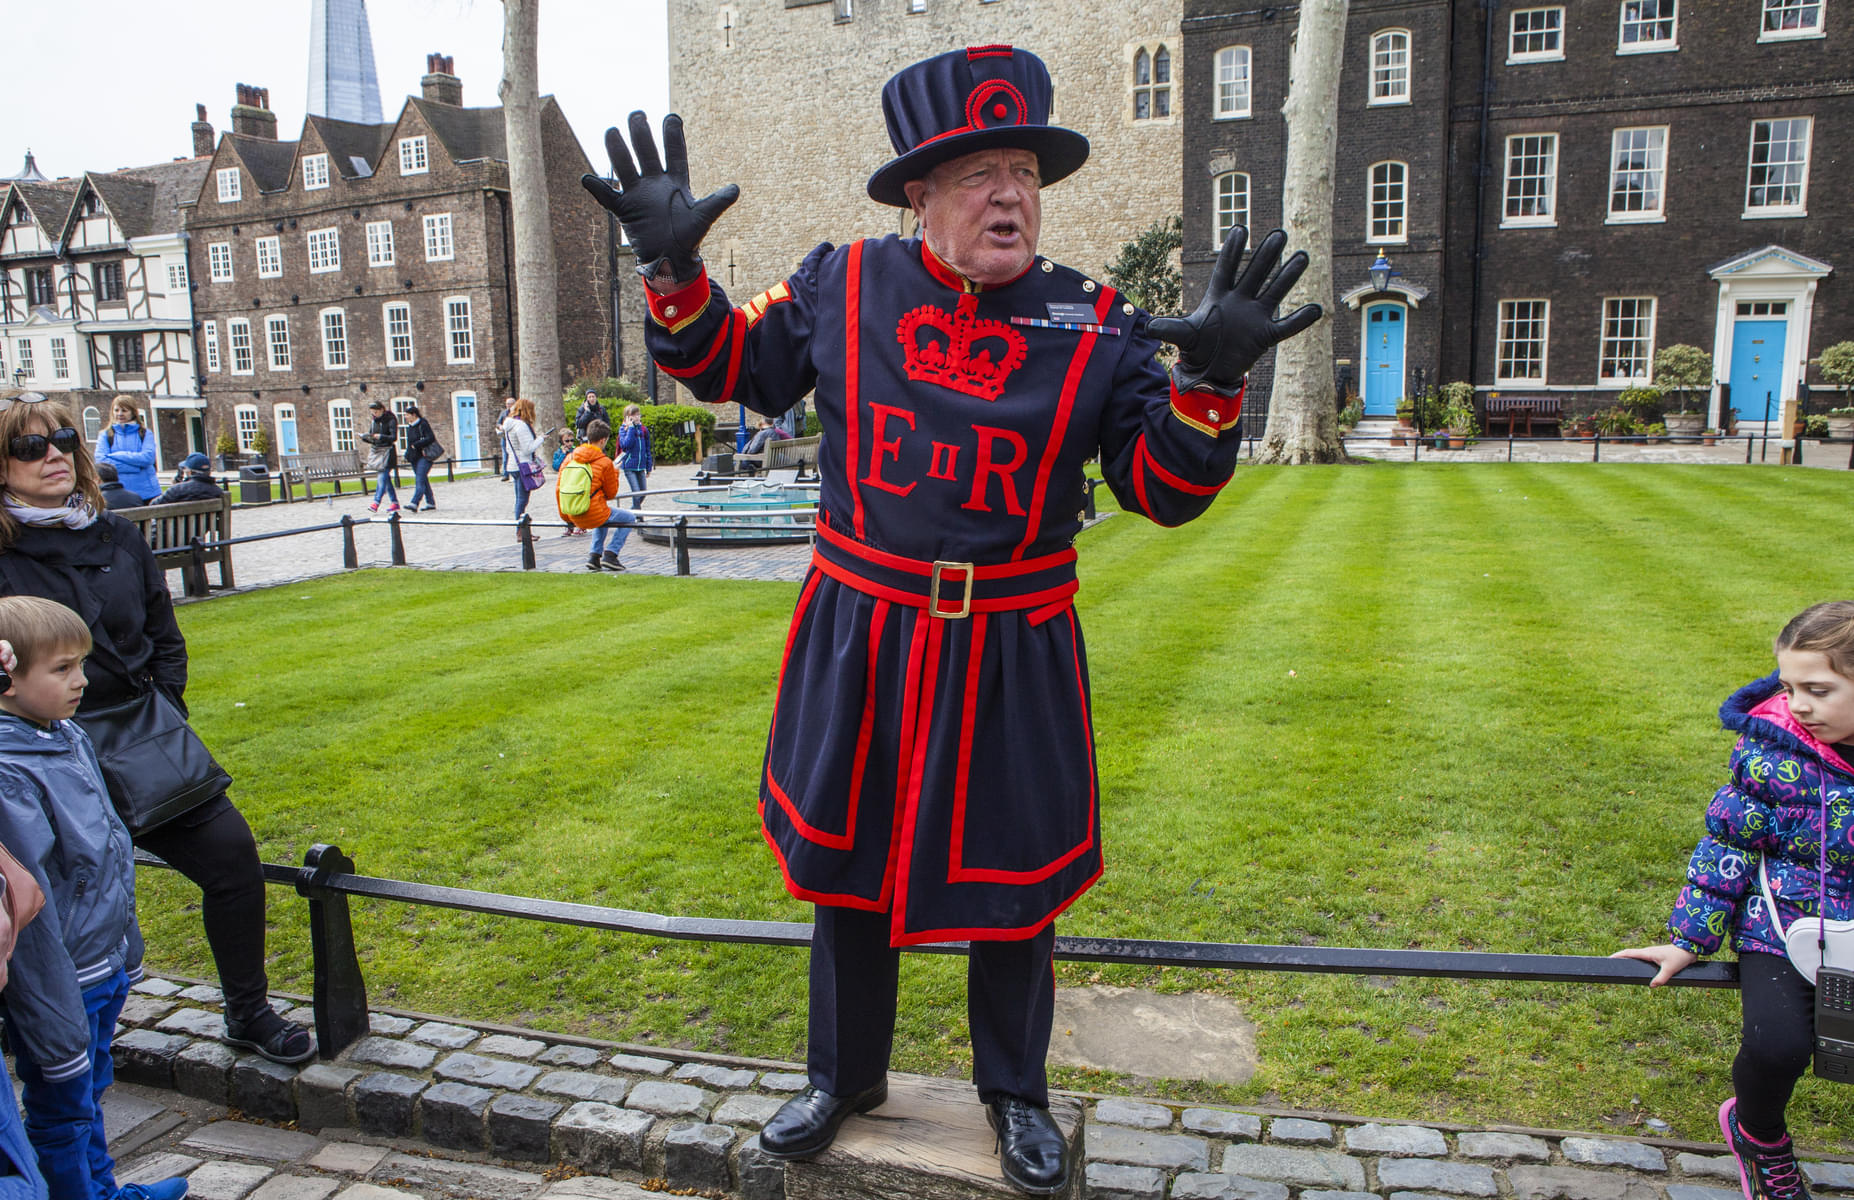 Listen to Yeoman Warder for interesting tales of Tower of London